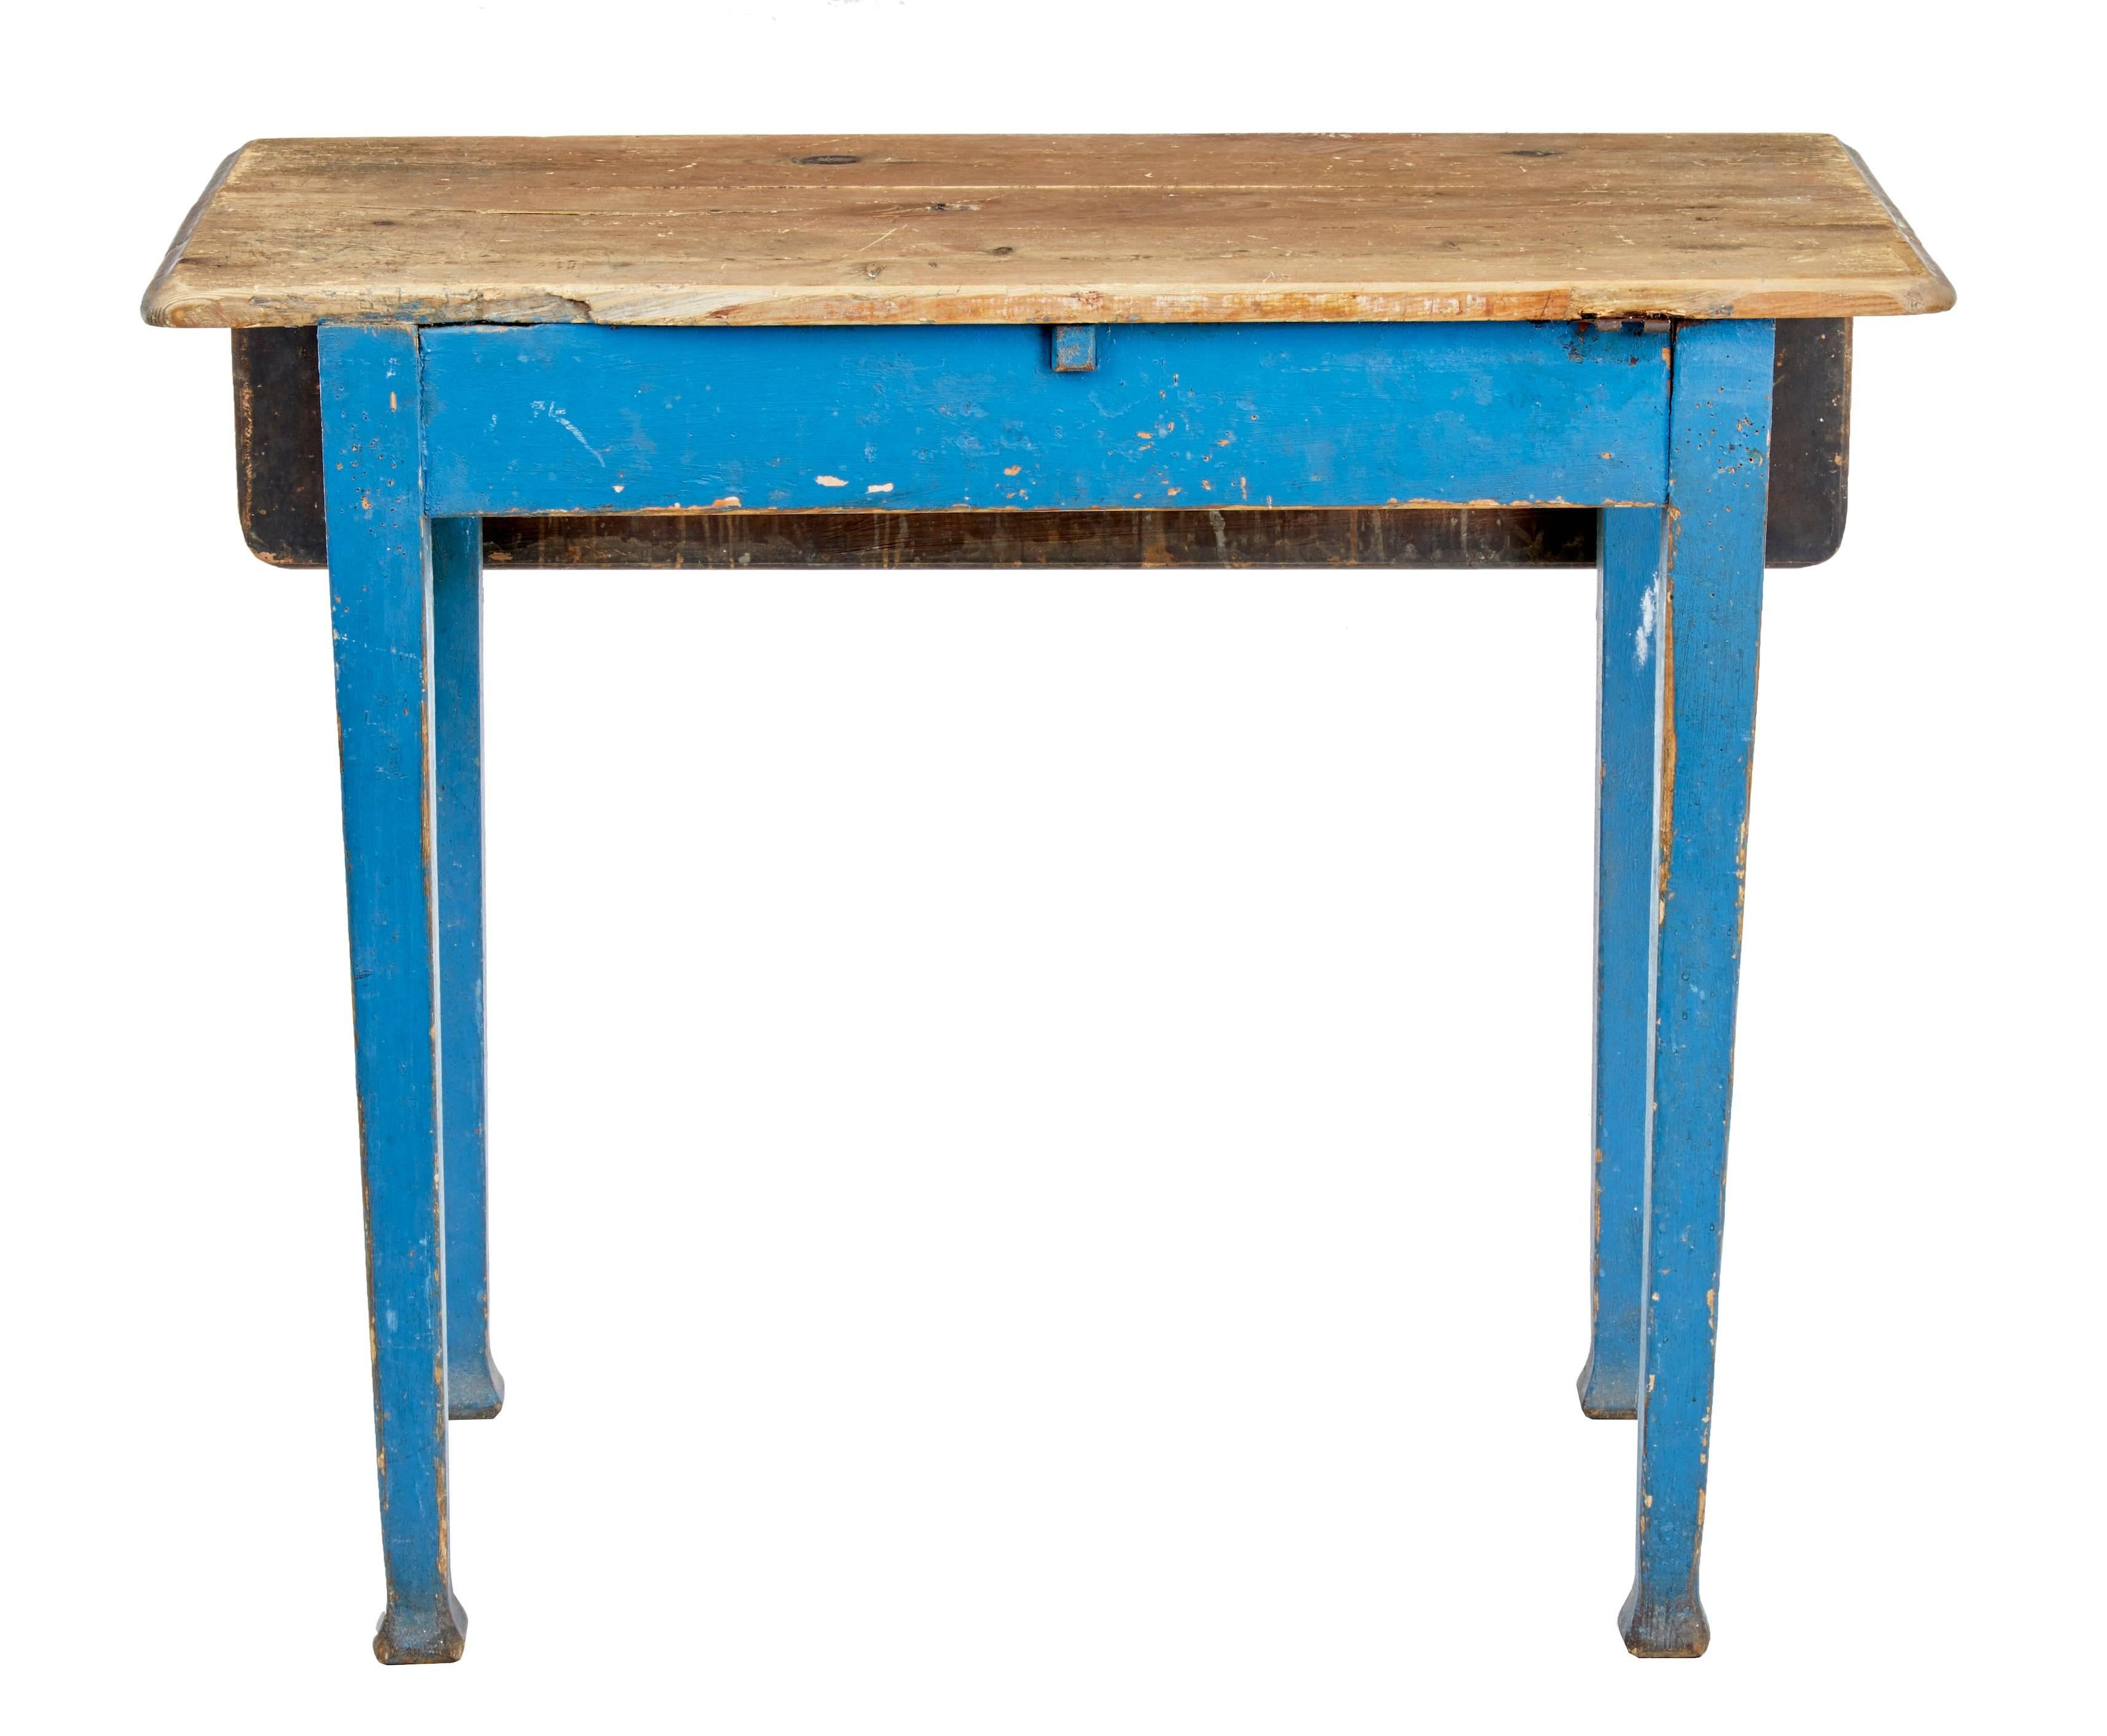 Rustic 19th Century Swedish Painted Pine Drop-Leaf Kitchen Table